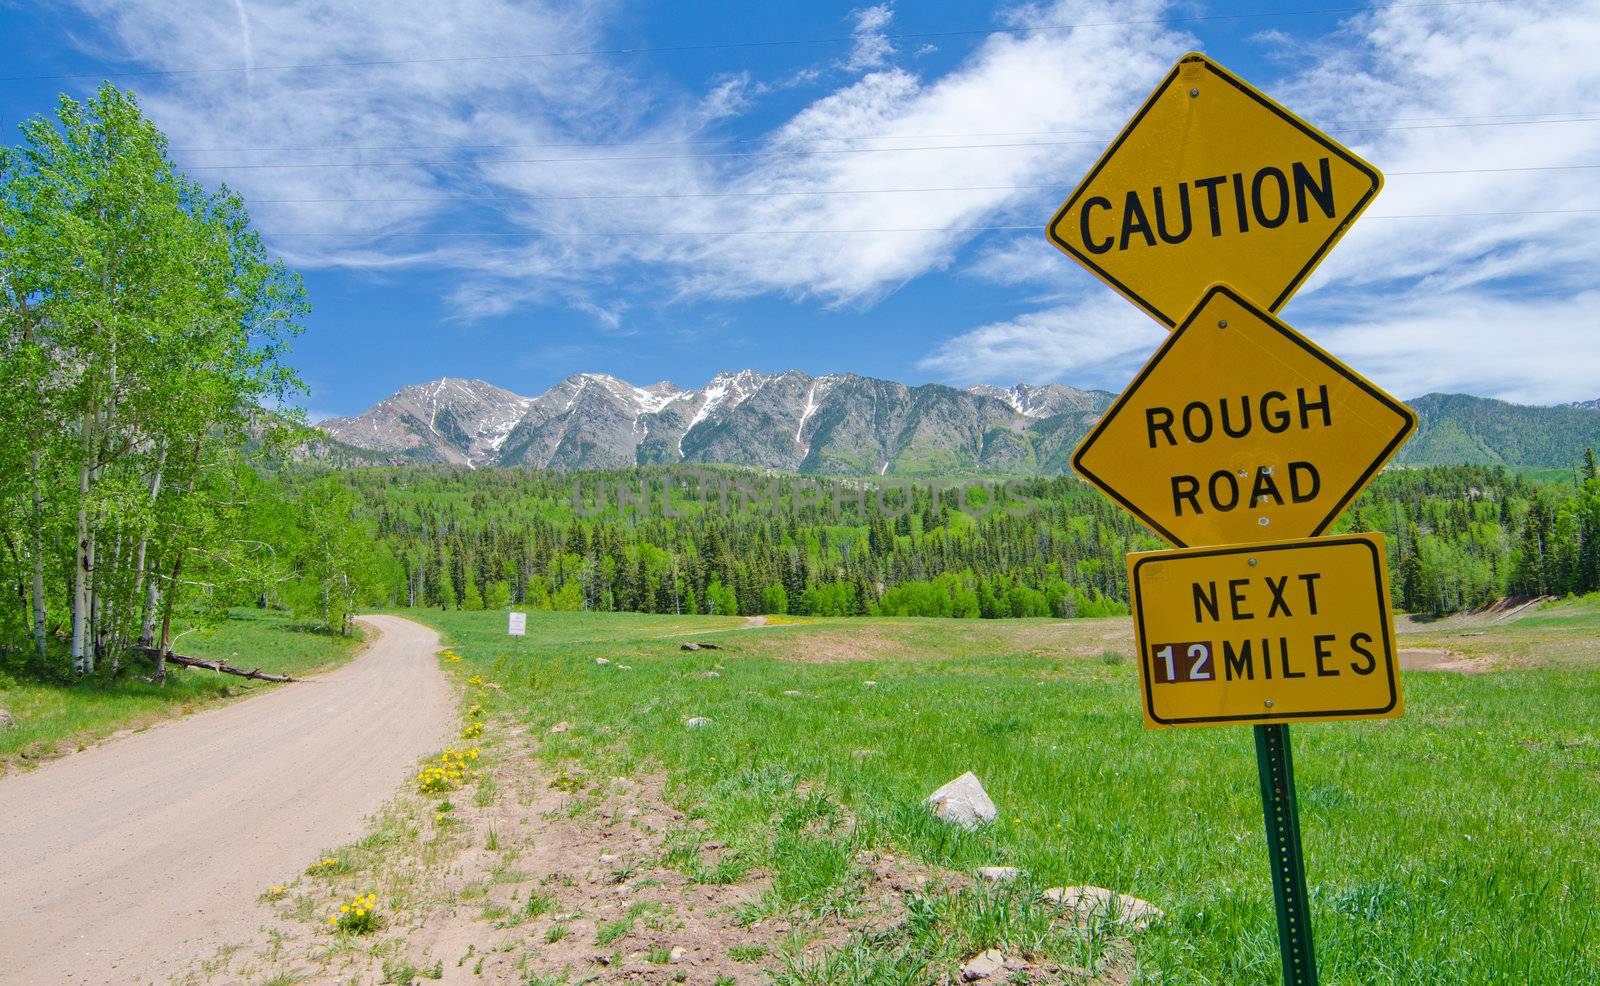 Caution: Rough Road Sign in the San Juan Mountains in Colorado by robert.bohrer25@gmail.com